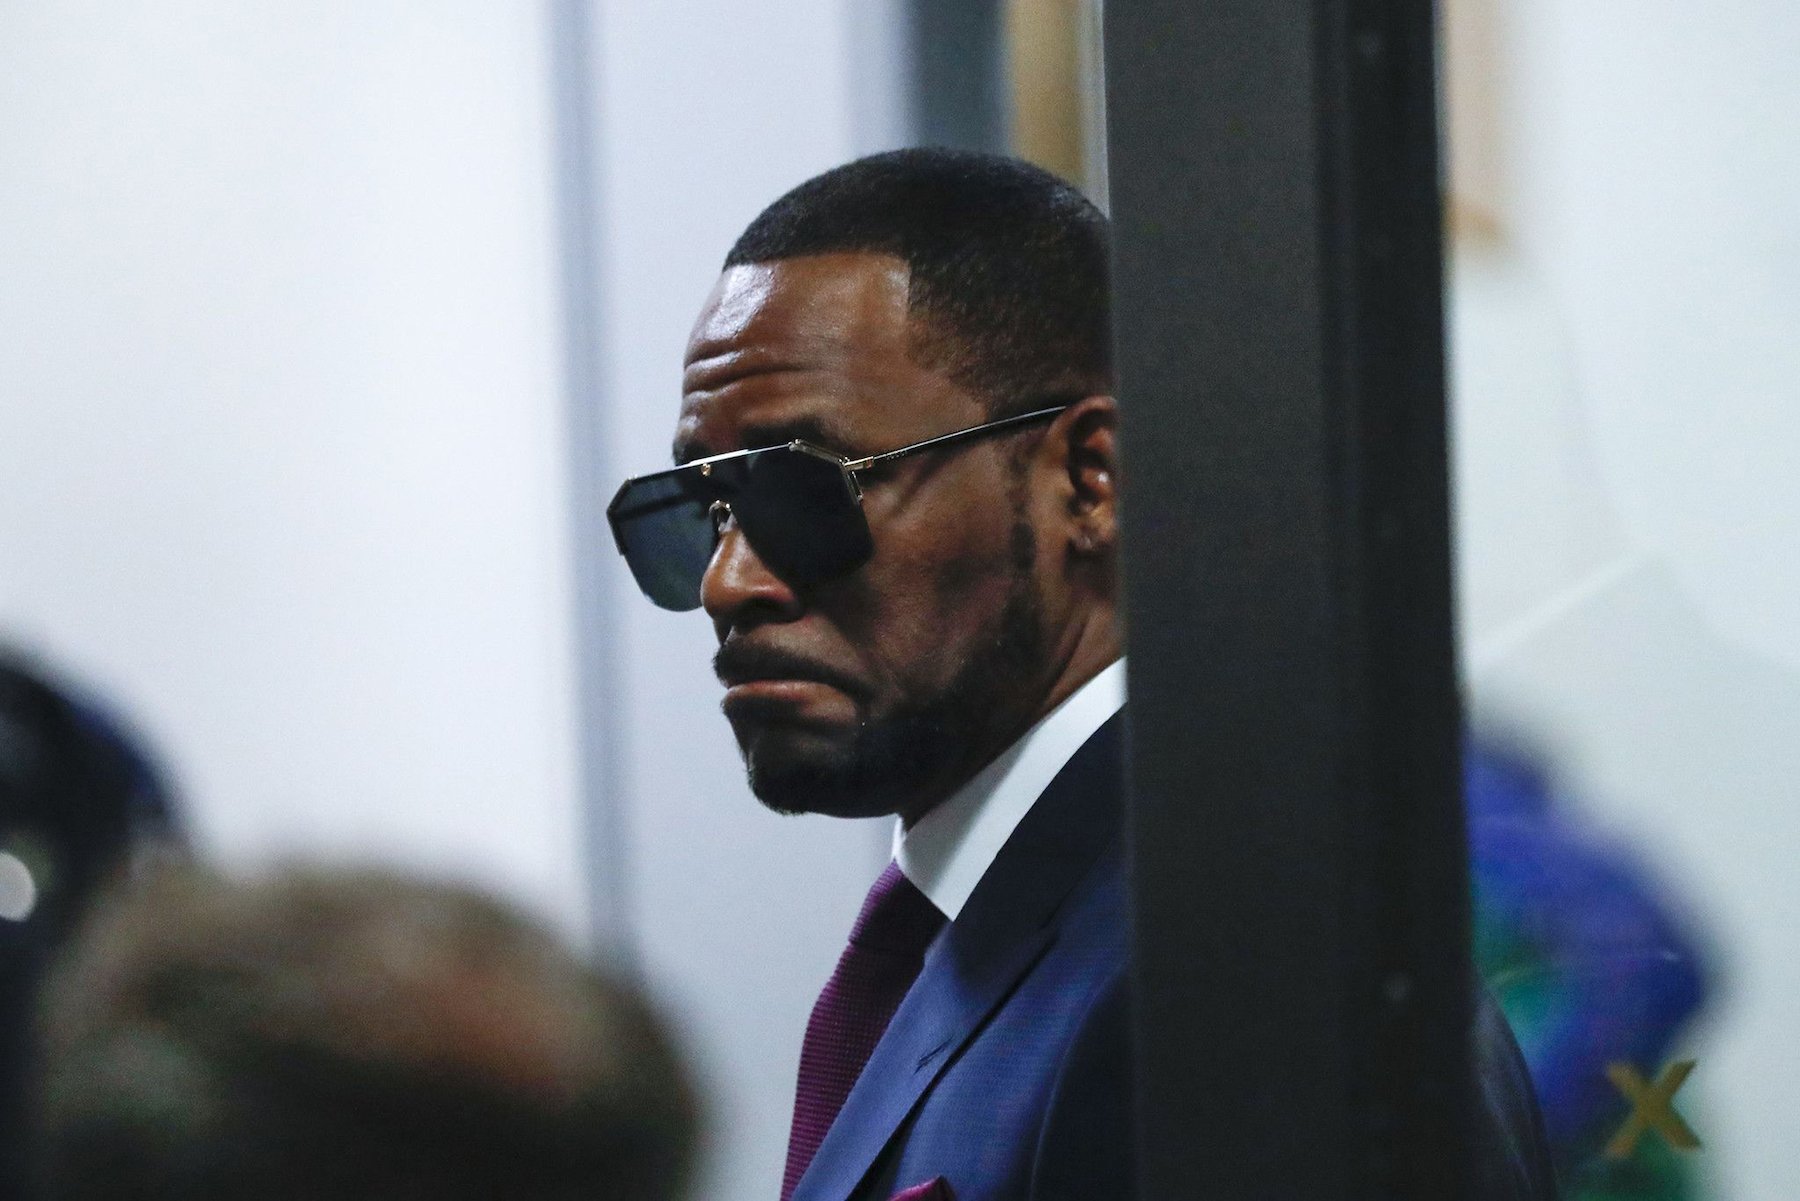 R. Kelly, who has faced abuse allegations in recent years, wears sunglasses and a navy suit